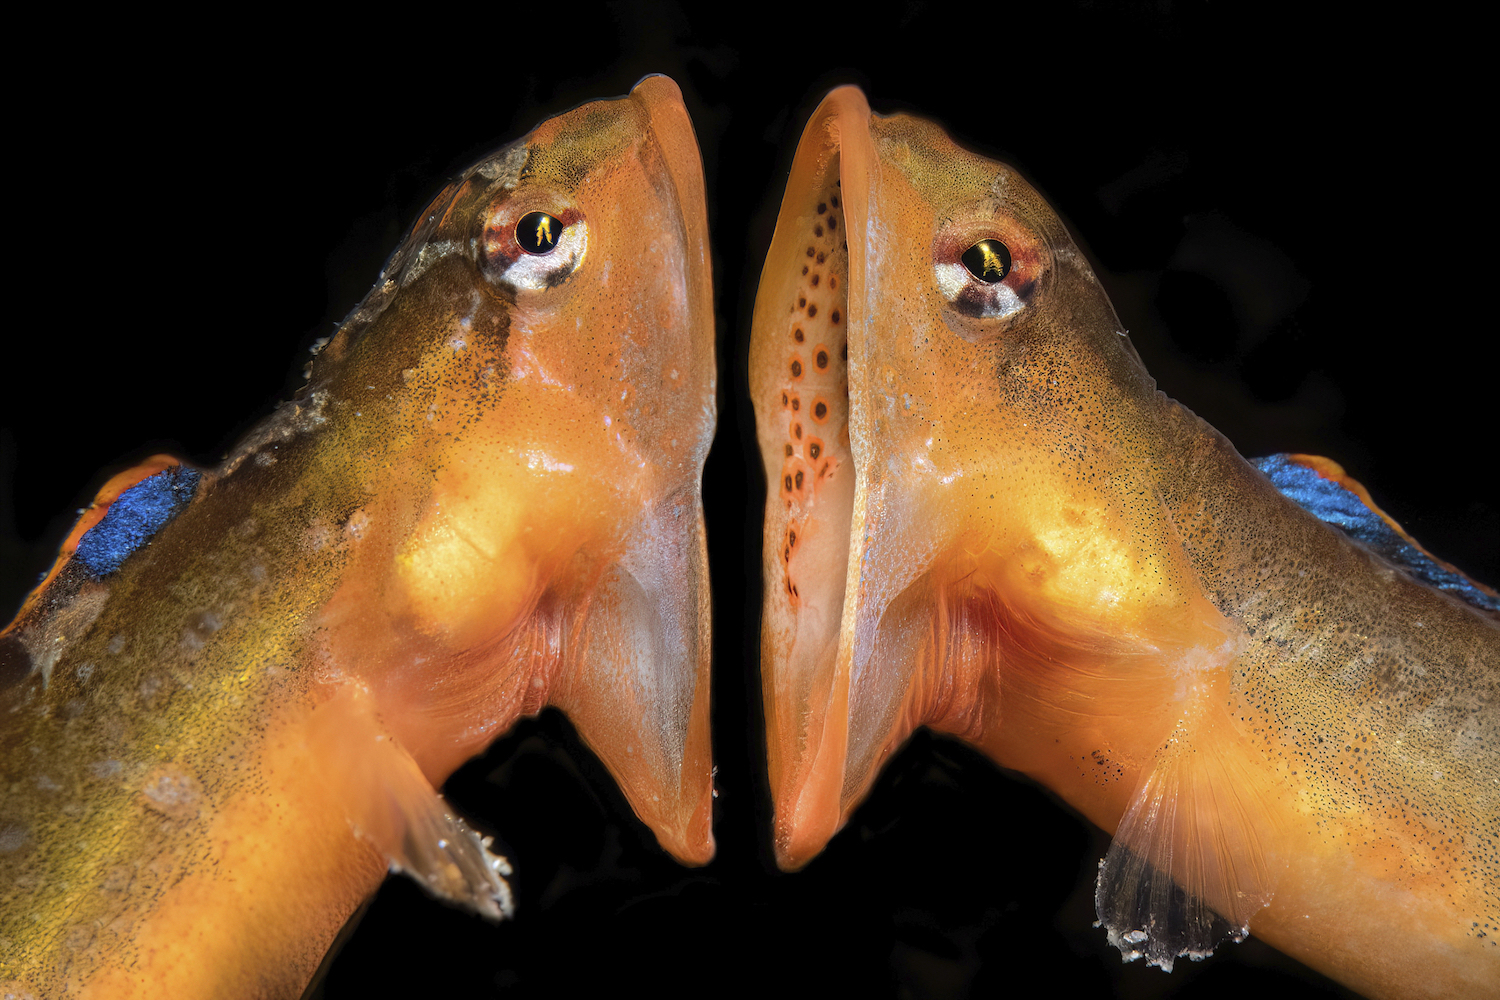 Two orange eel-like creatures face each other with their mouths gaping open